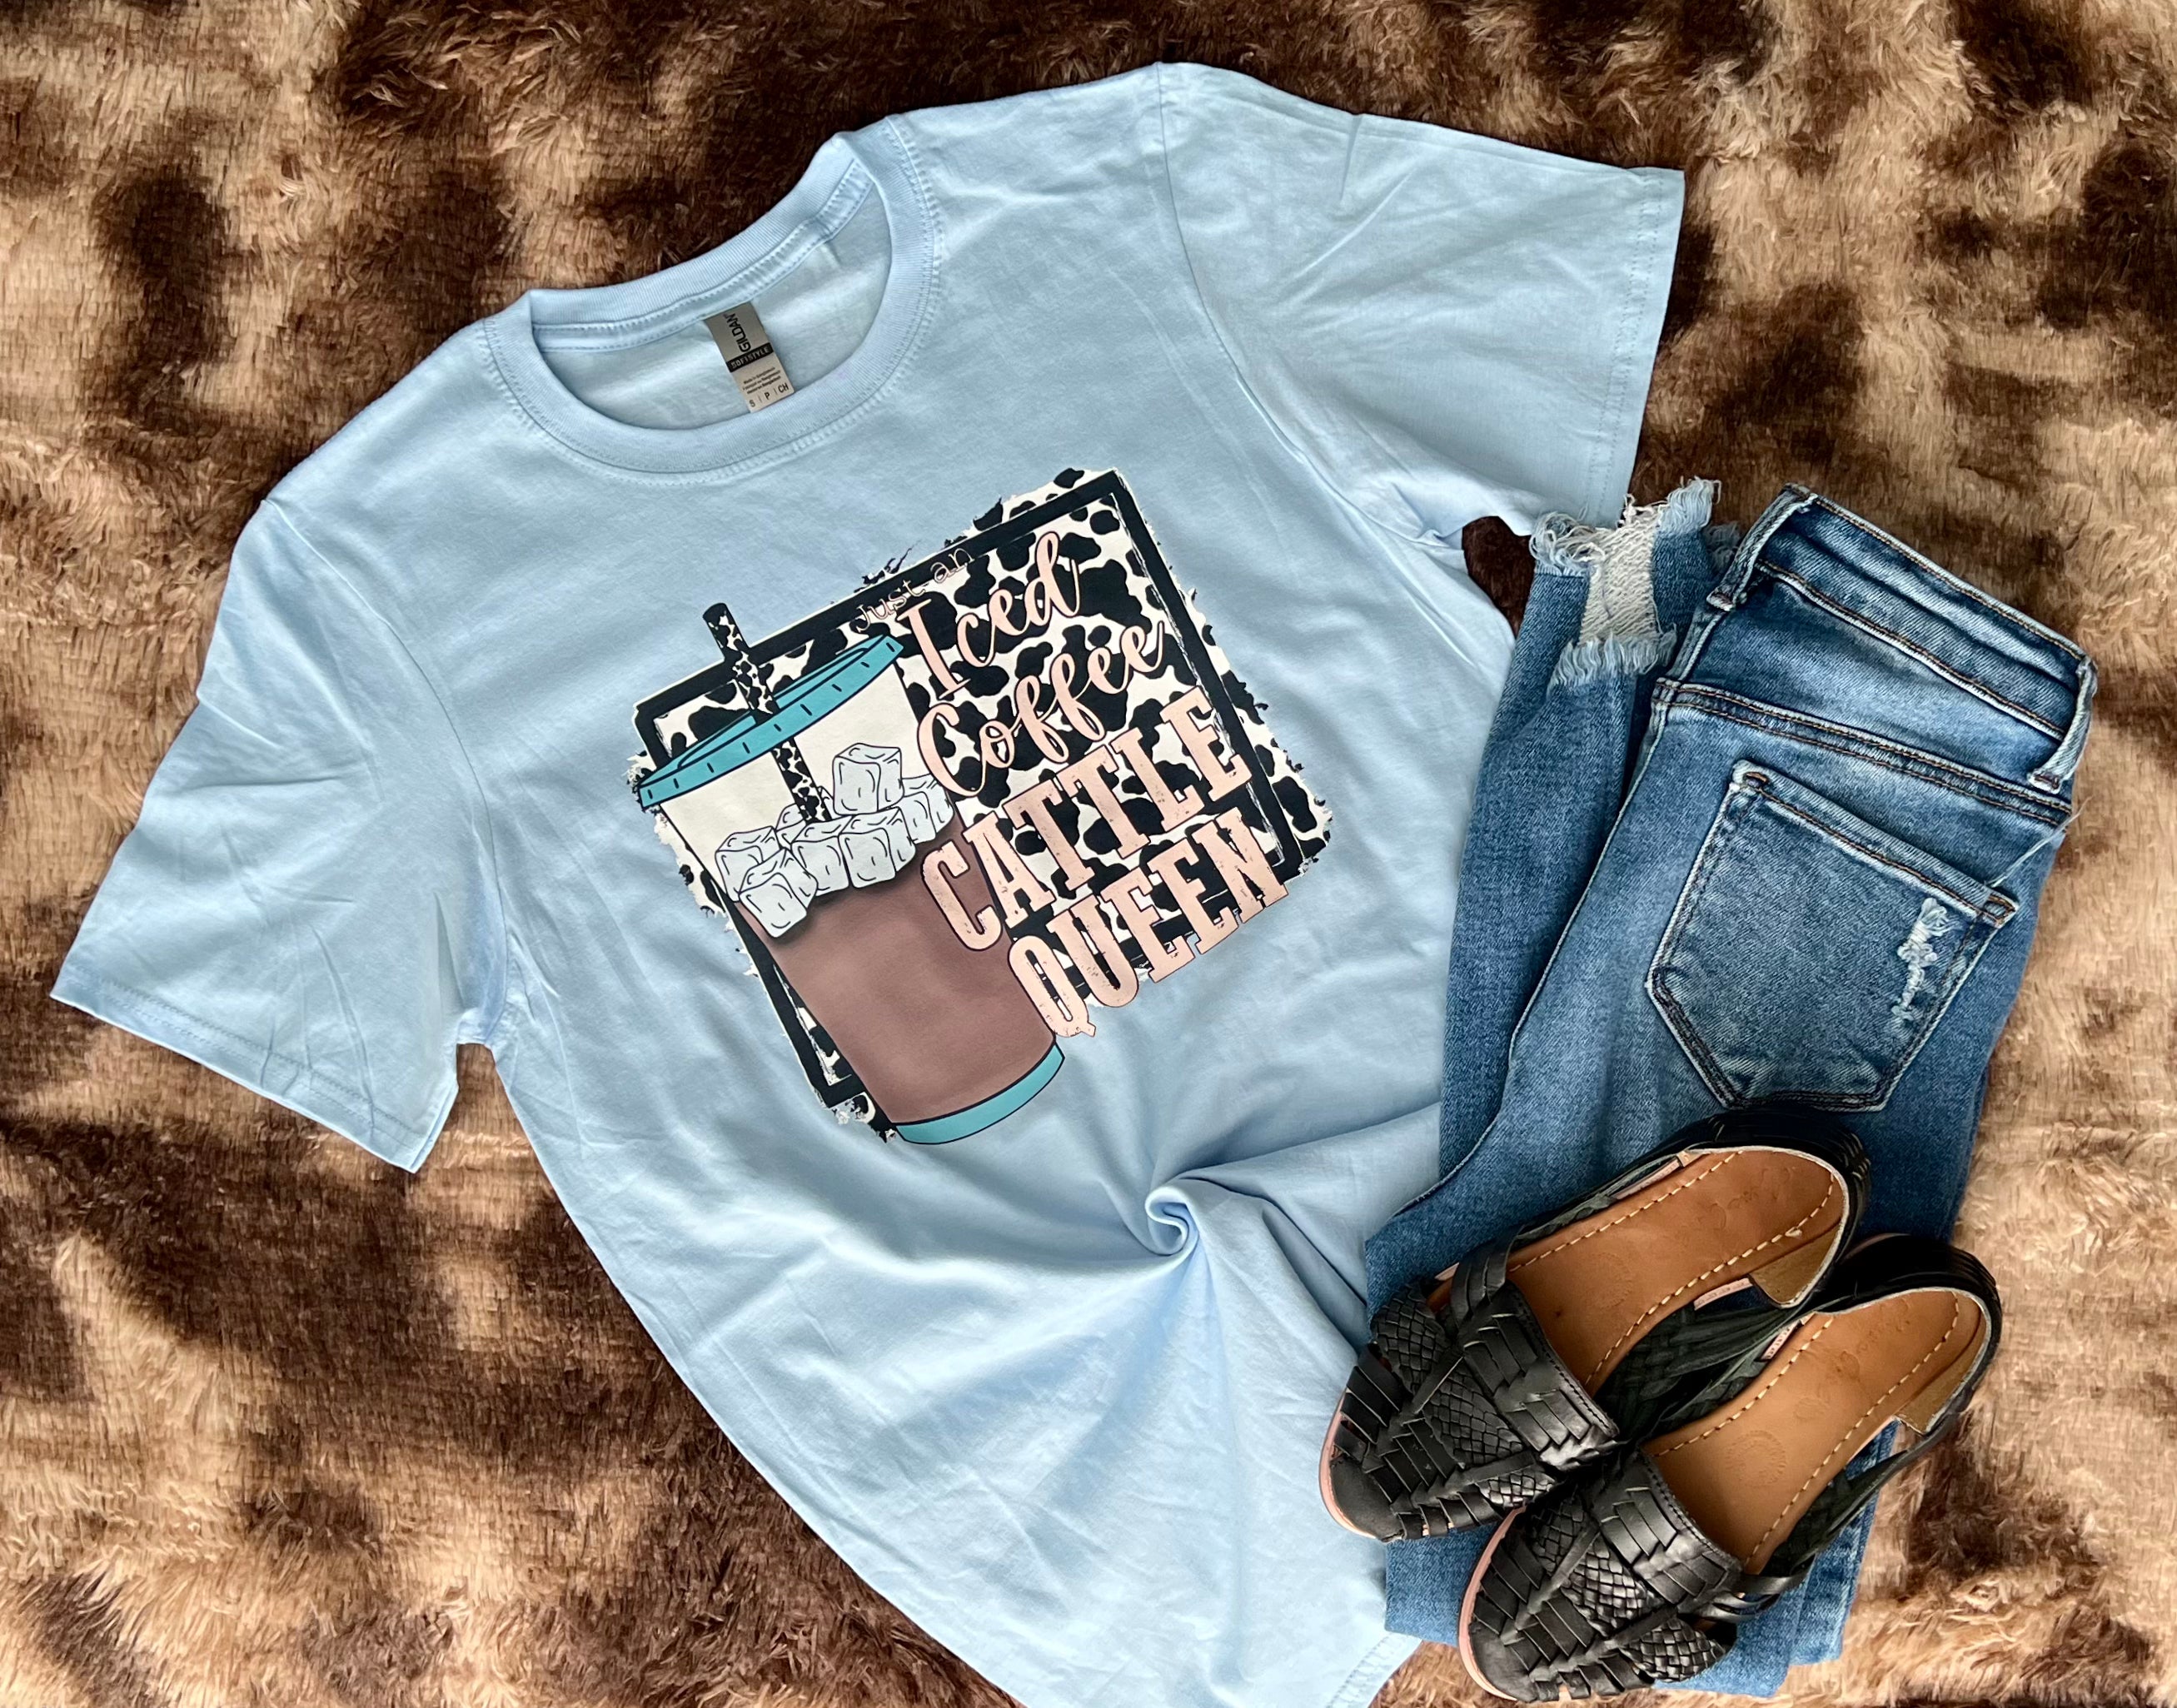 Iced Coffee Cattle Queen Tee